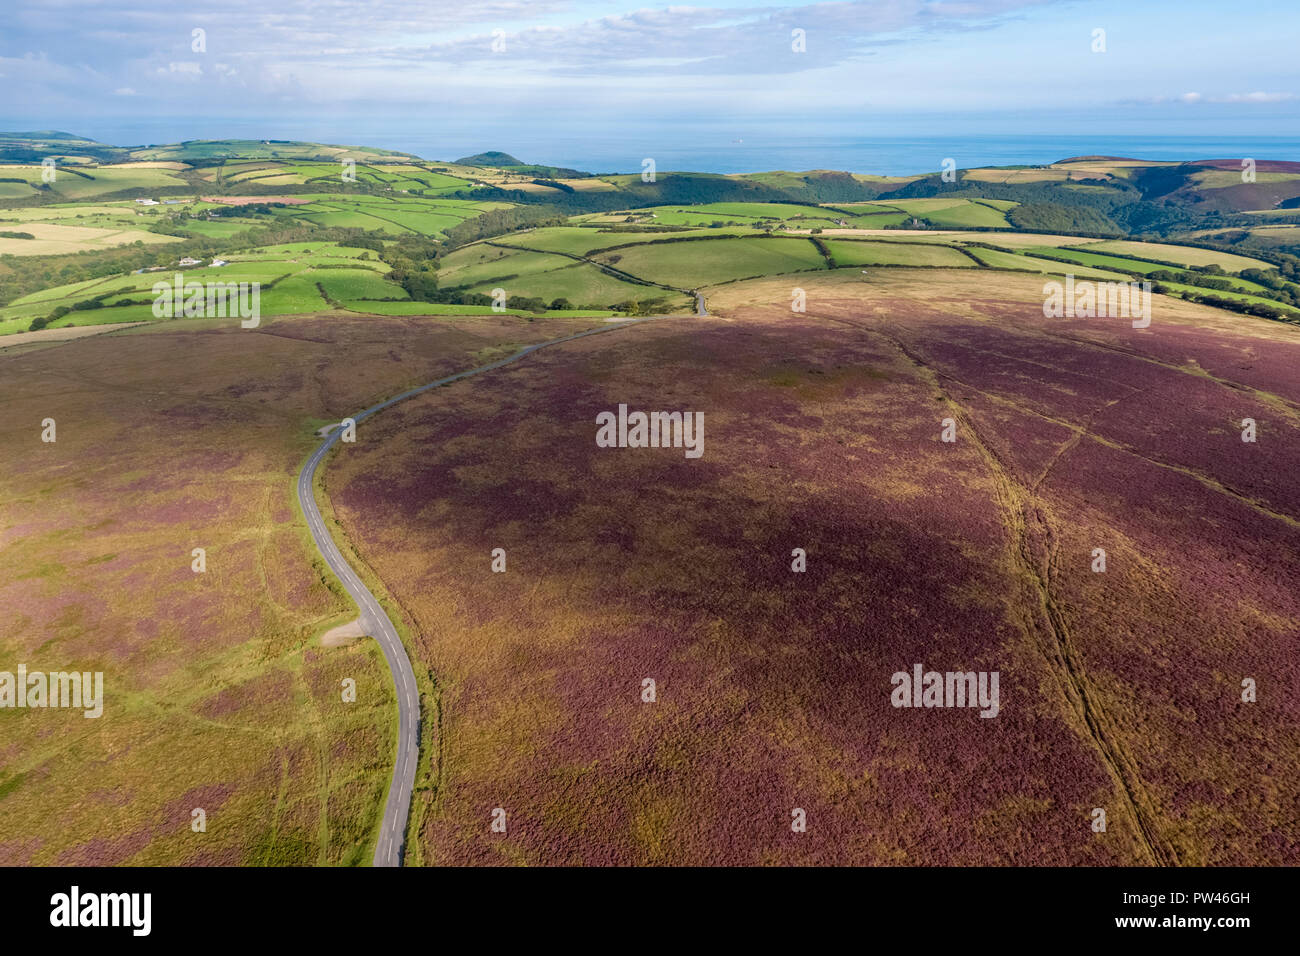 United Kingdom, Devon, Exmoor National Park, aerial view over the moors Stock Photo